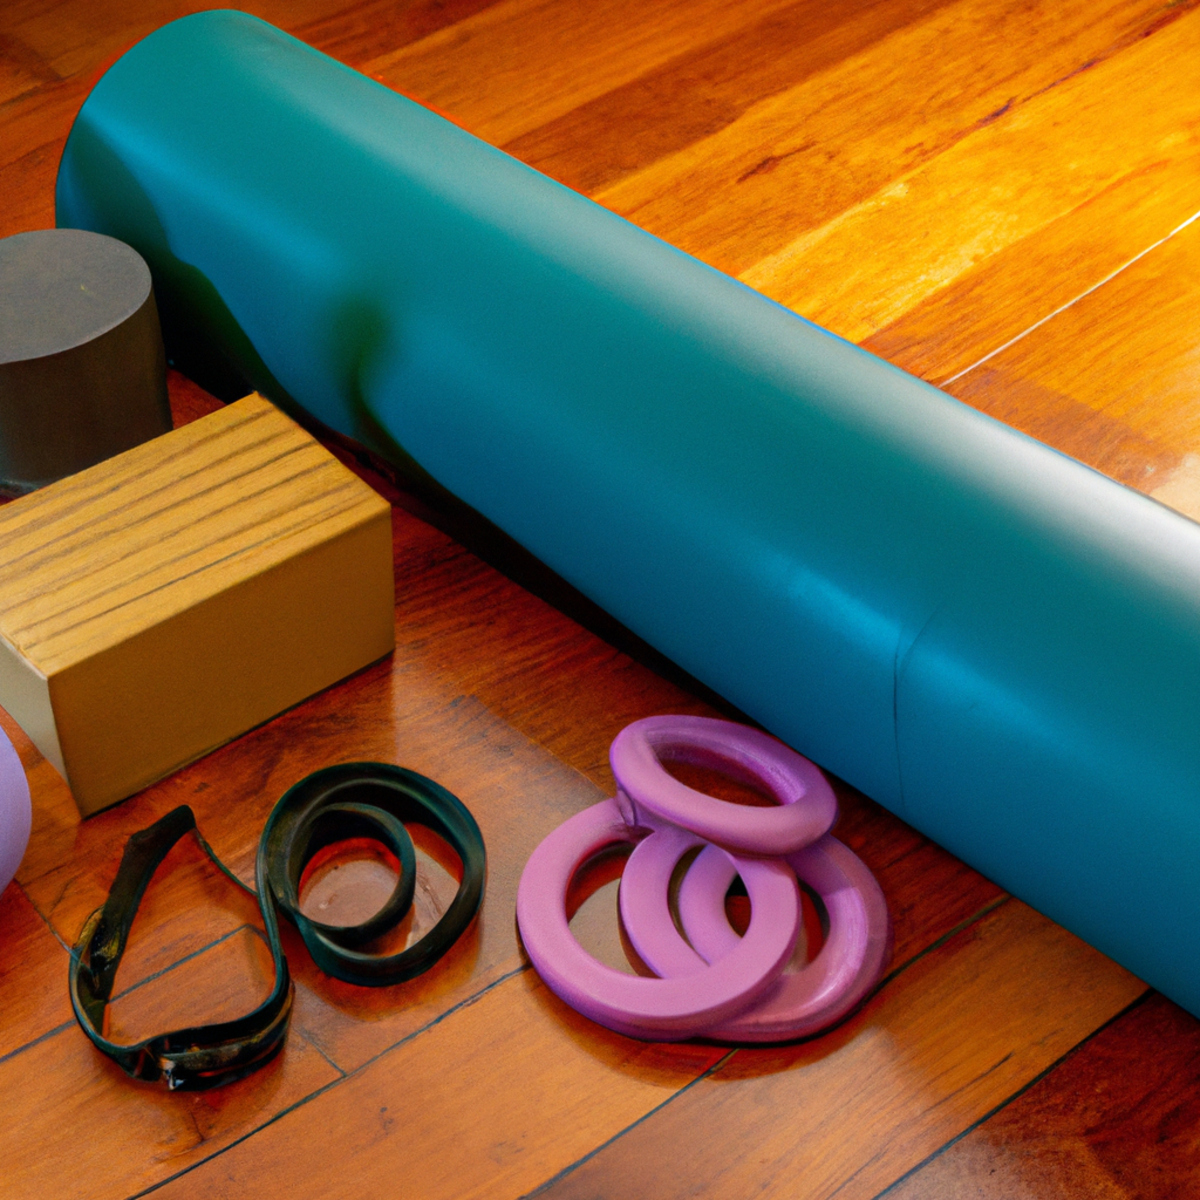 The photo captures a serene scene of a yoga mat laid out on a wooden floor, surrounded by various objects. A foam roller, yoga blocks, and a resistance band are neatly arranged on one side, while a Pilates ball and a set of hand weights sit on the other. The lighting is soft and natural, casting a warm glow over the scene. The attention to detail is evident in the way the objects are placed, creating a sense of balance and harmony. It's clear that this is a space where one can stretch their limits and find inner peace through the practice of yoga and Pilates.